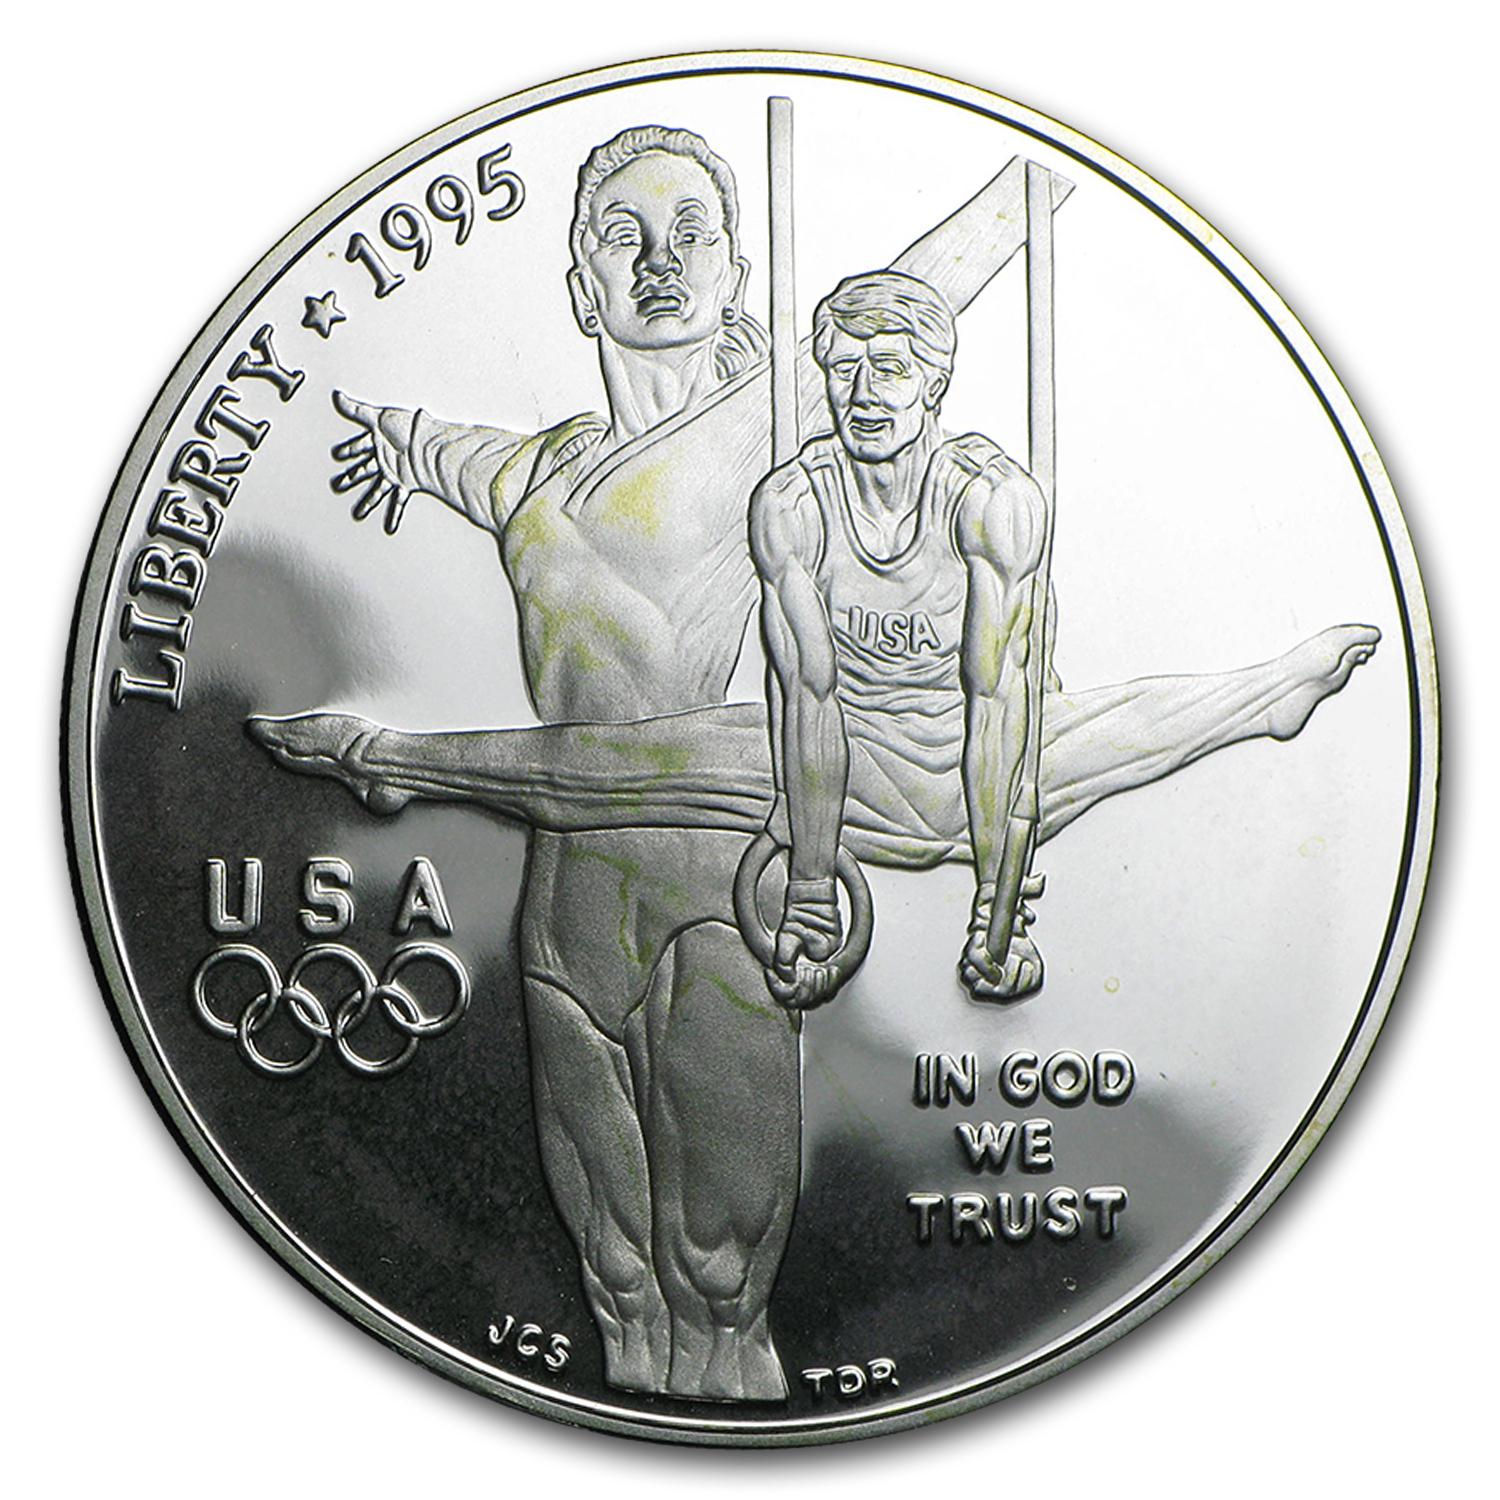 Buy 1995-P Olympic Gymnast $1 Silver Commem Proof (Capsule Only)